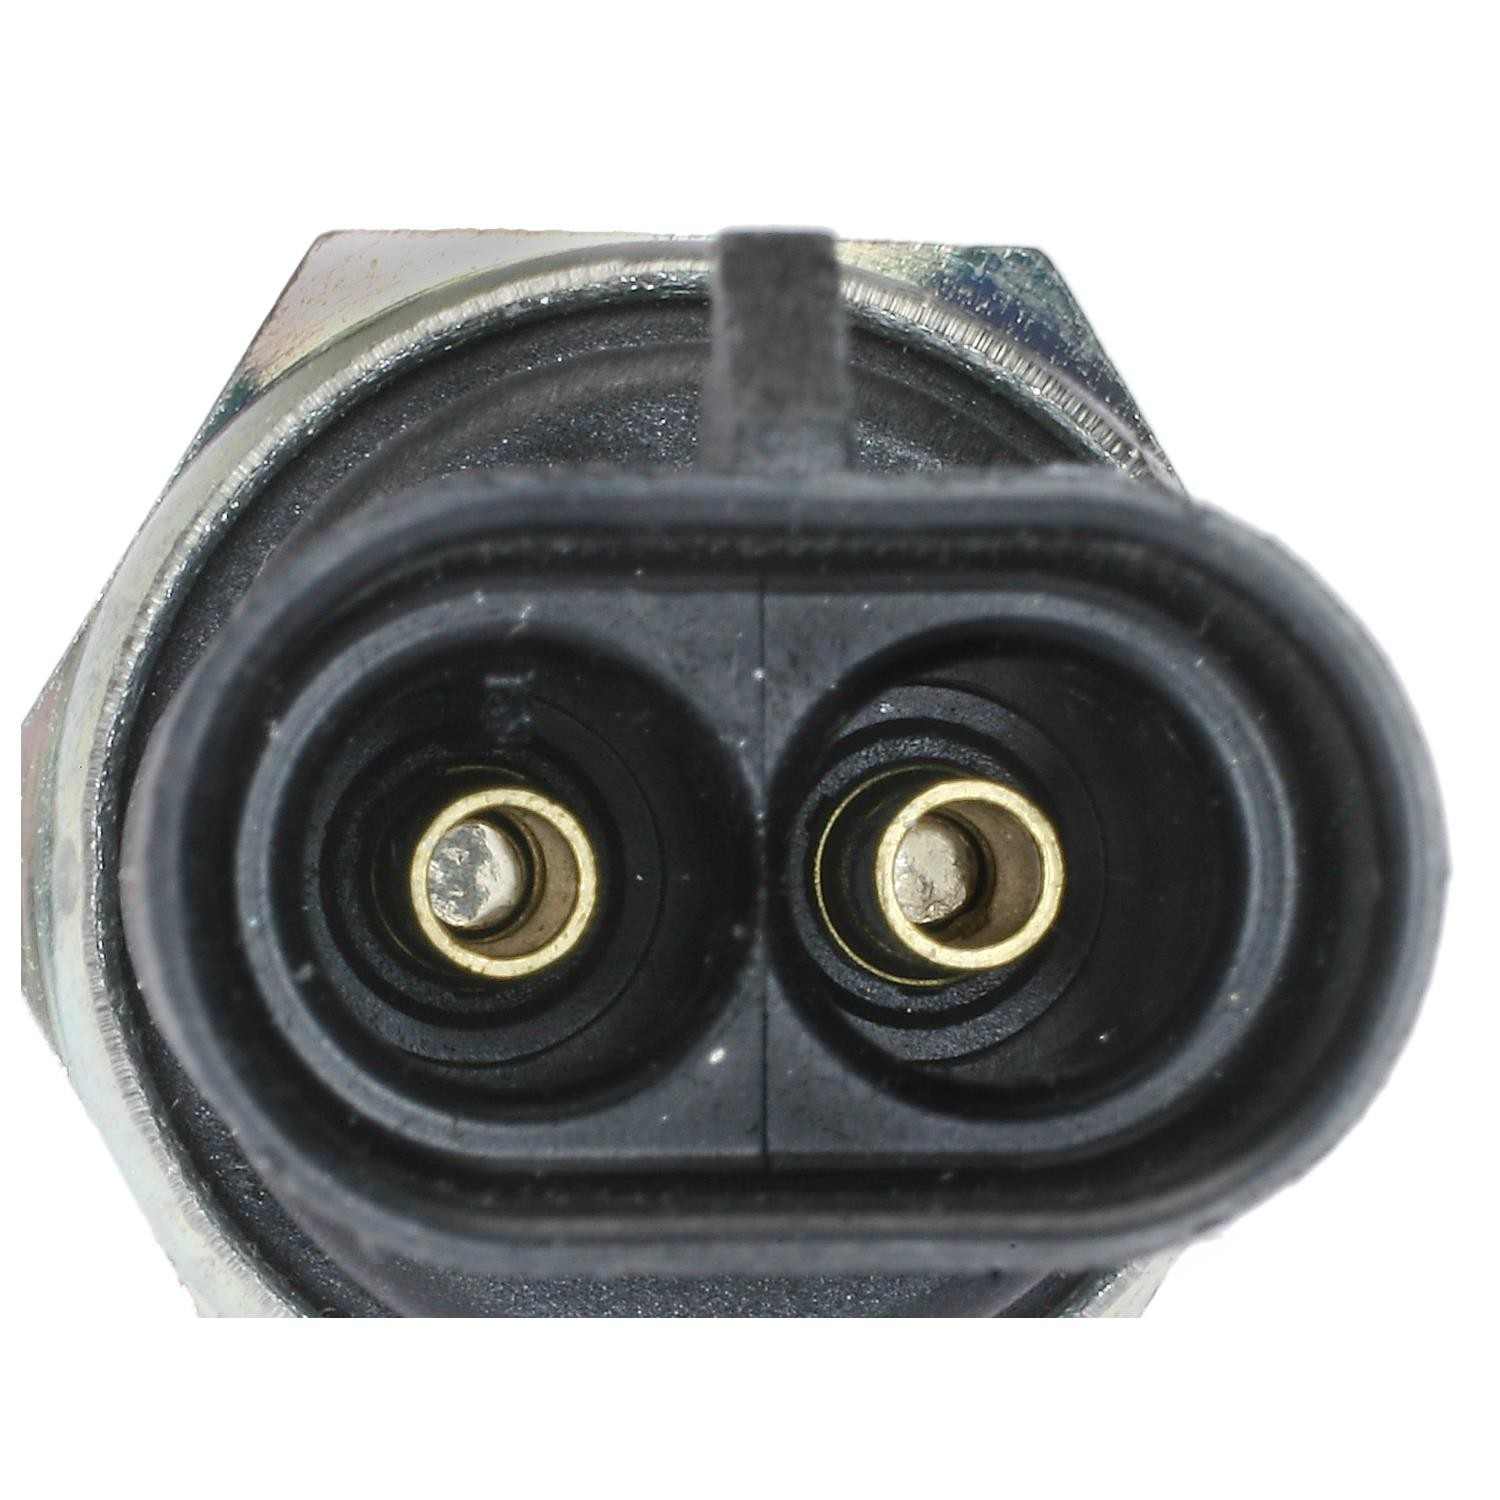 Other View of 4WD Indicator Light Switch STANDARD IGNITION TCA-25